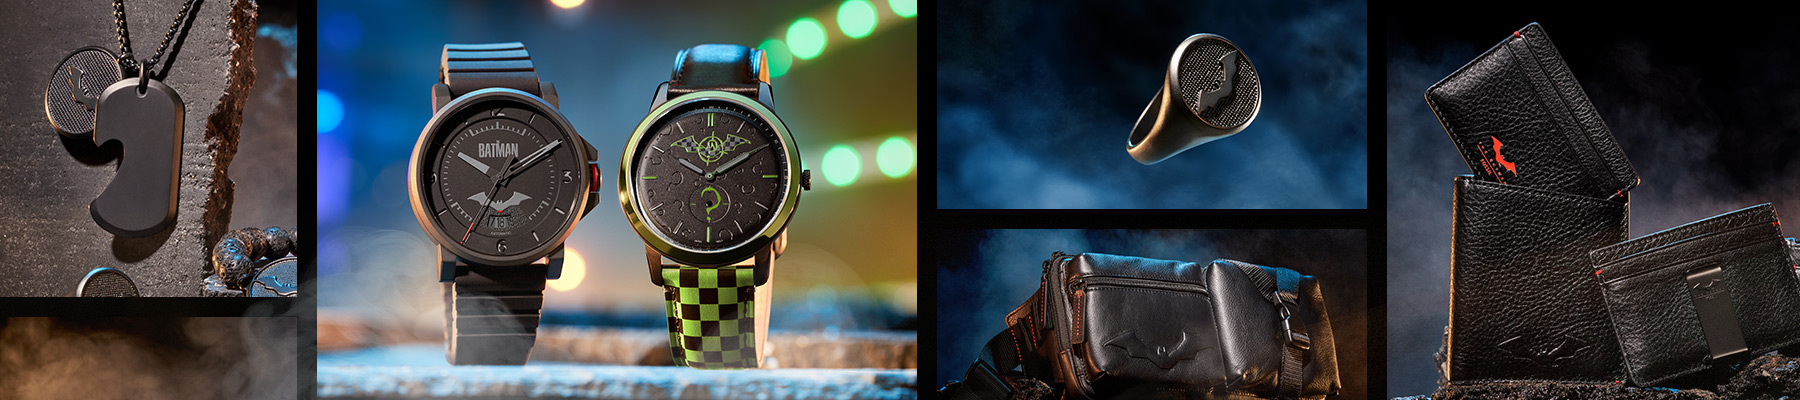 Fossil x DC x Warner Bros The Batman capsule collection